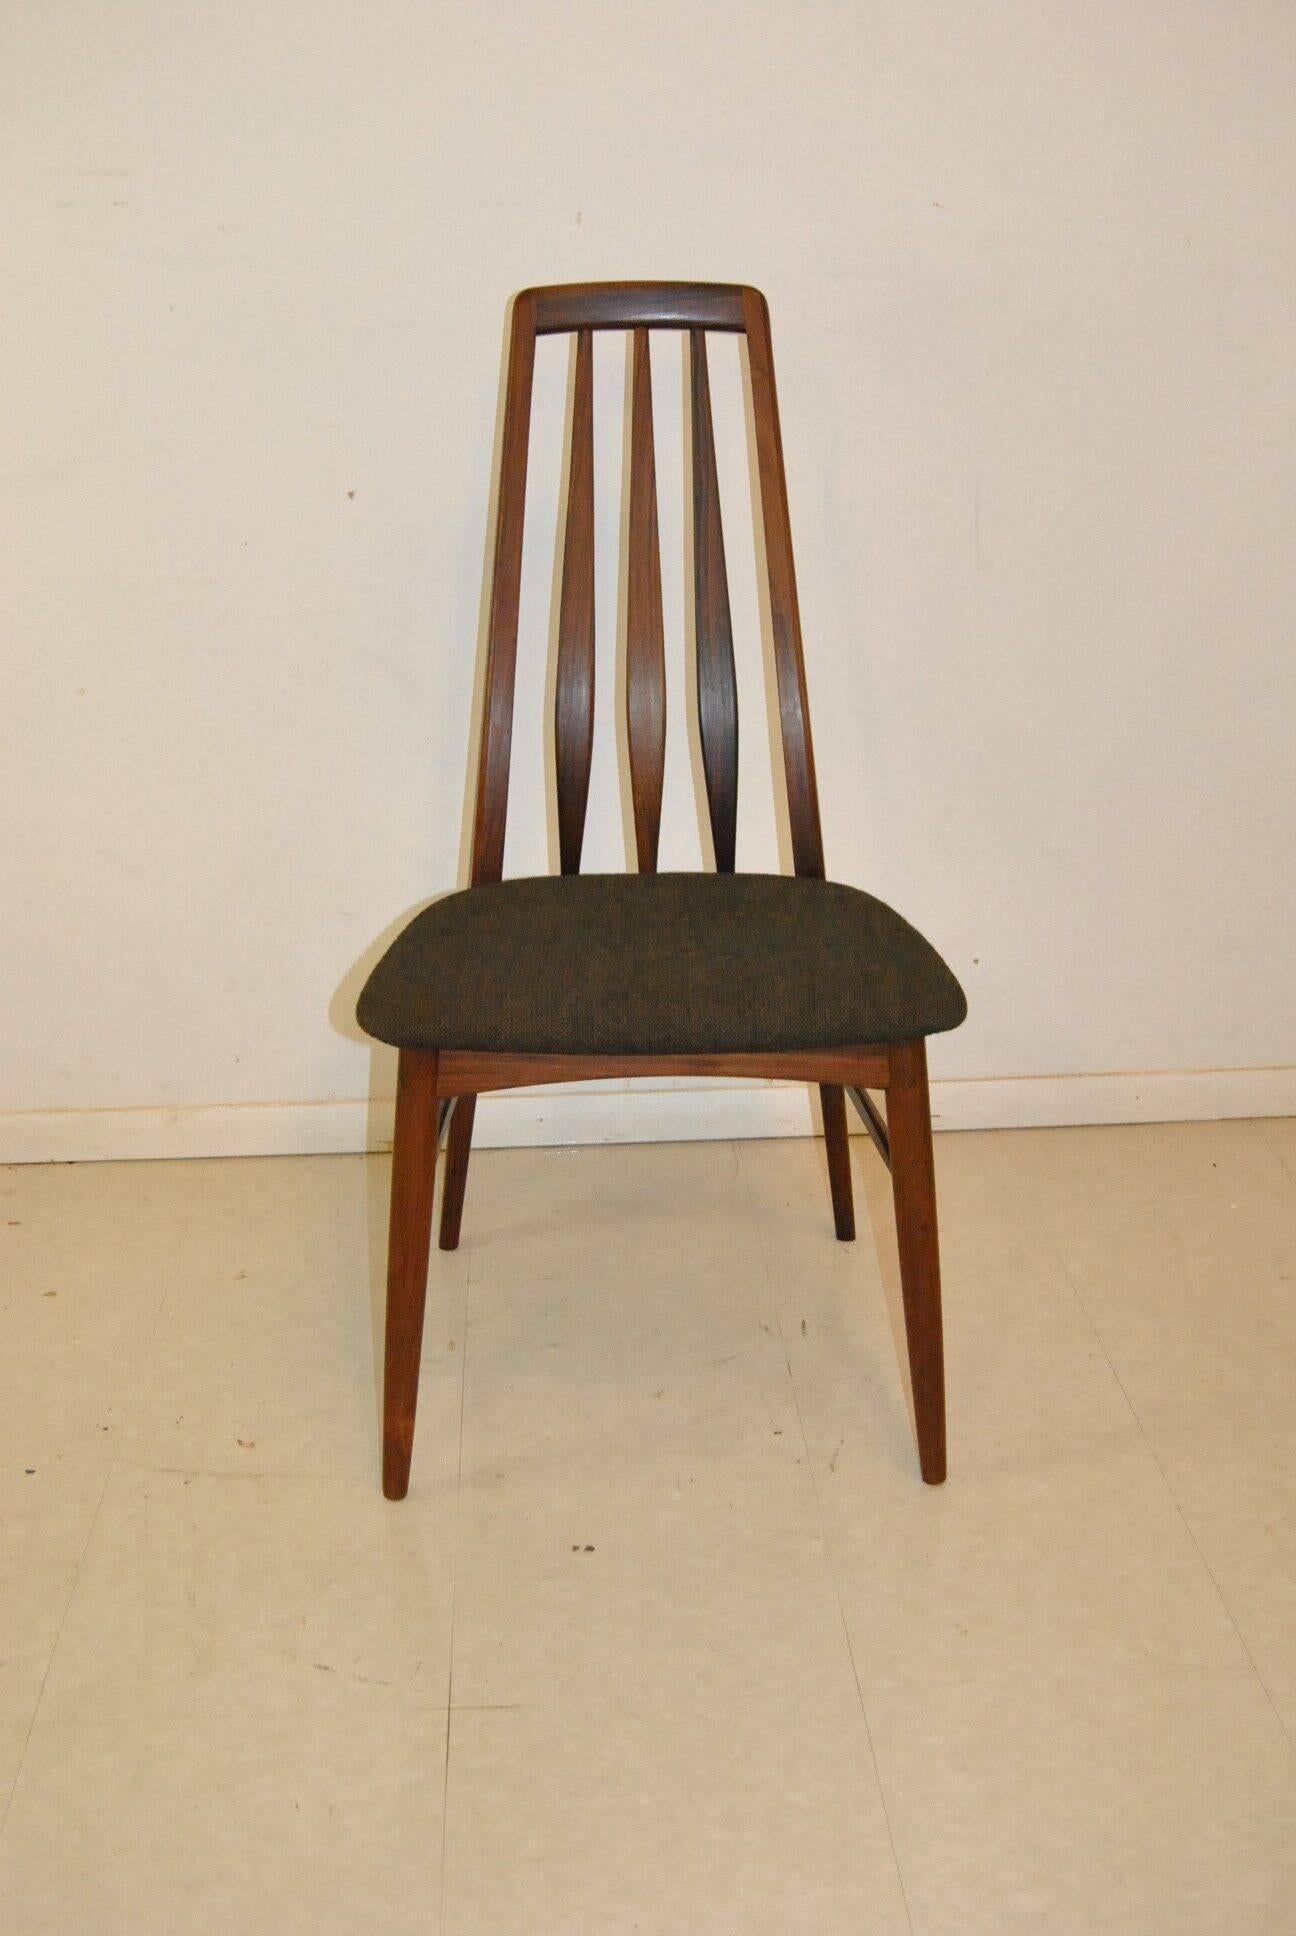 A set of eight Danish rosewood dining room chairs by Niels Koefoed for Hornslet Mobelfabrik. Referred to as the 